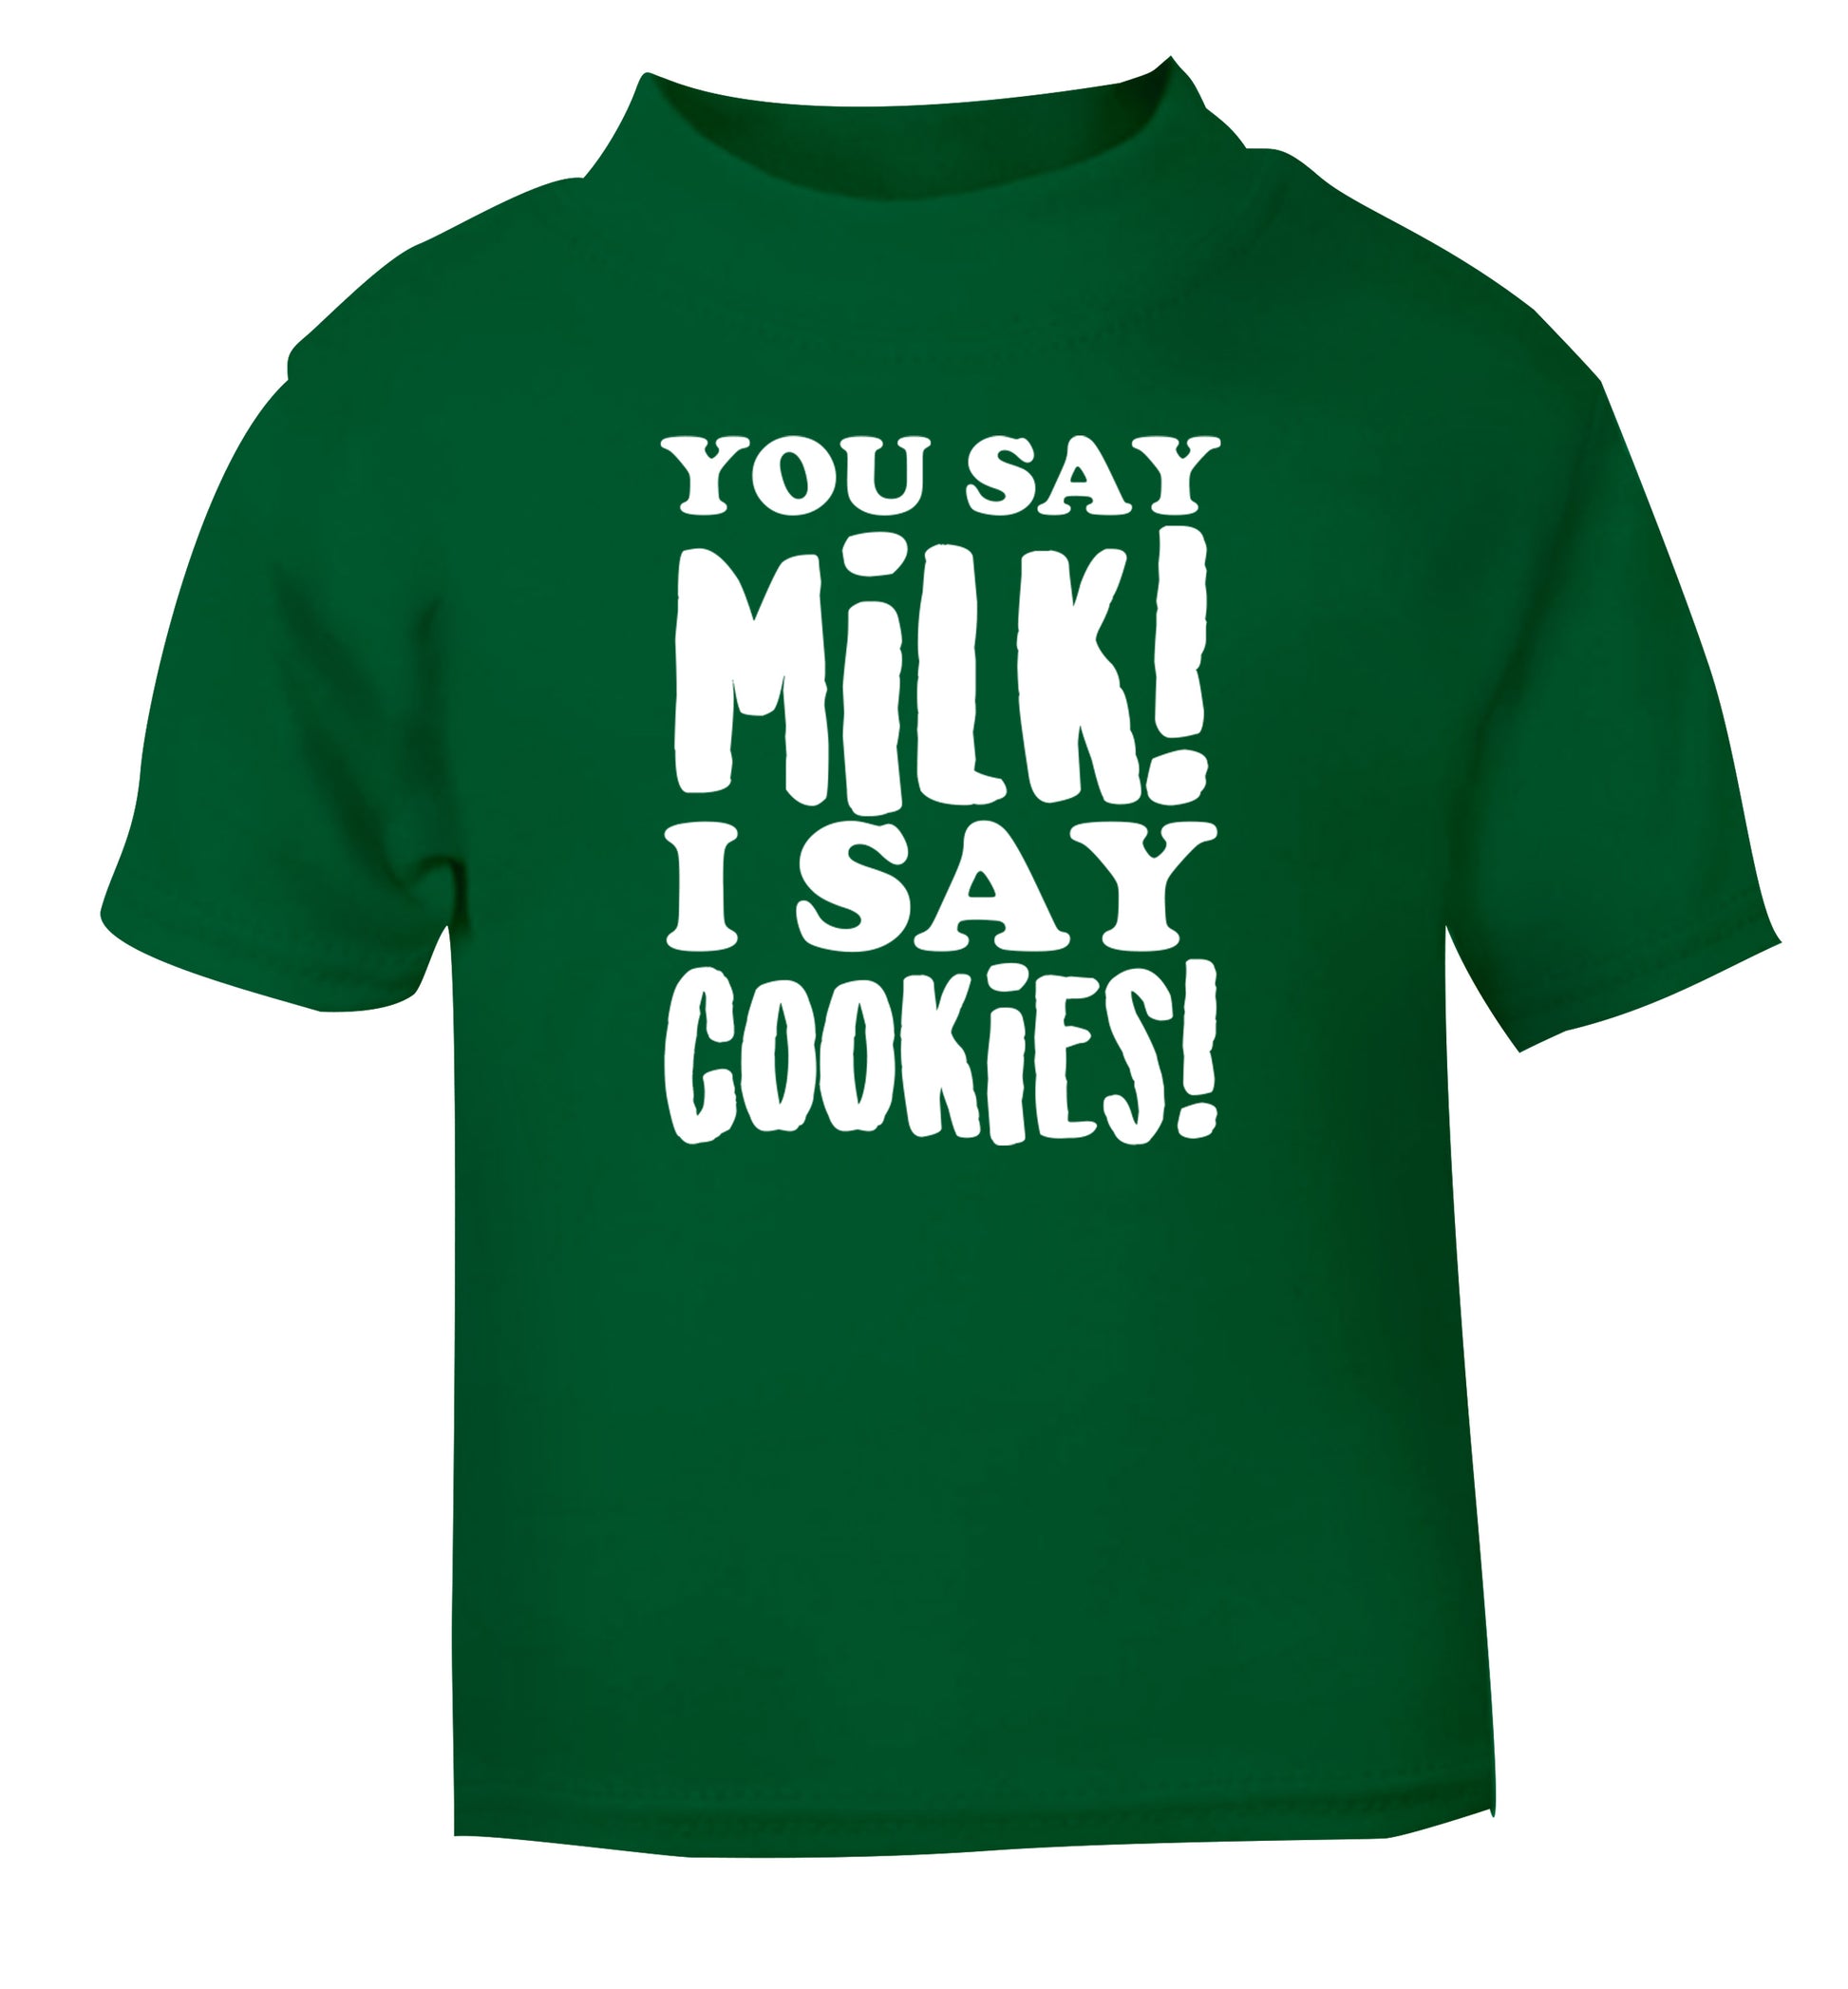 You say milk I say cookies! green Baby Toddler Tshirt 2 Years